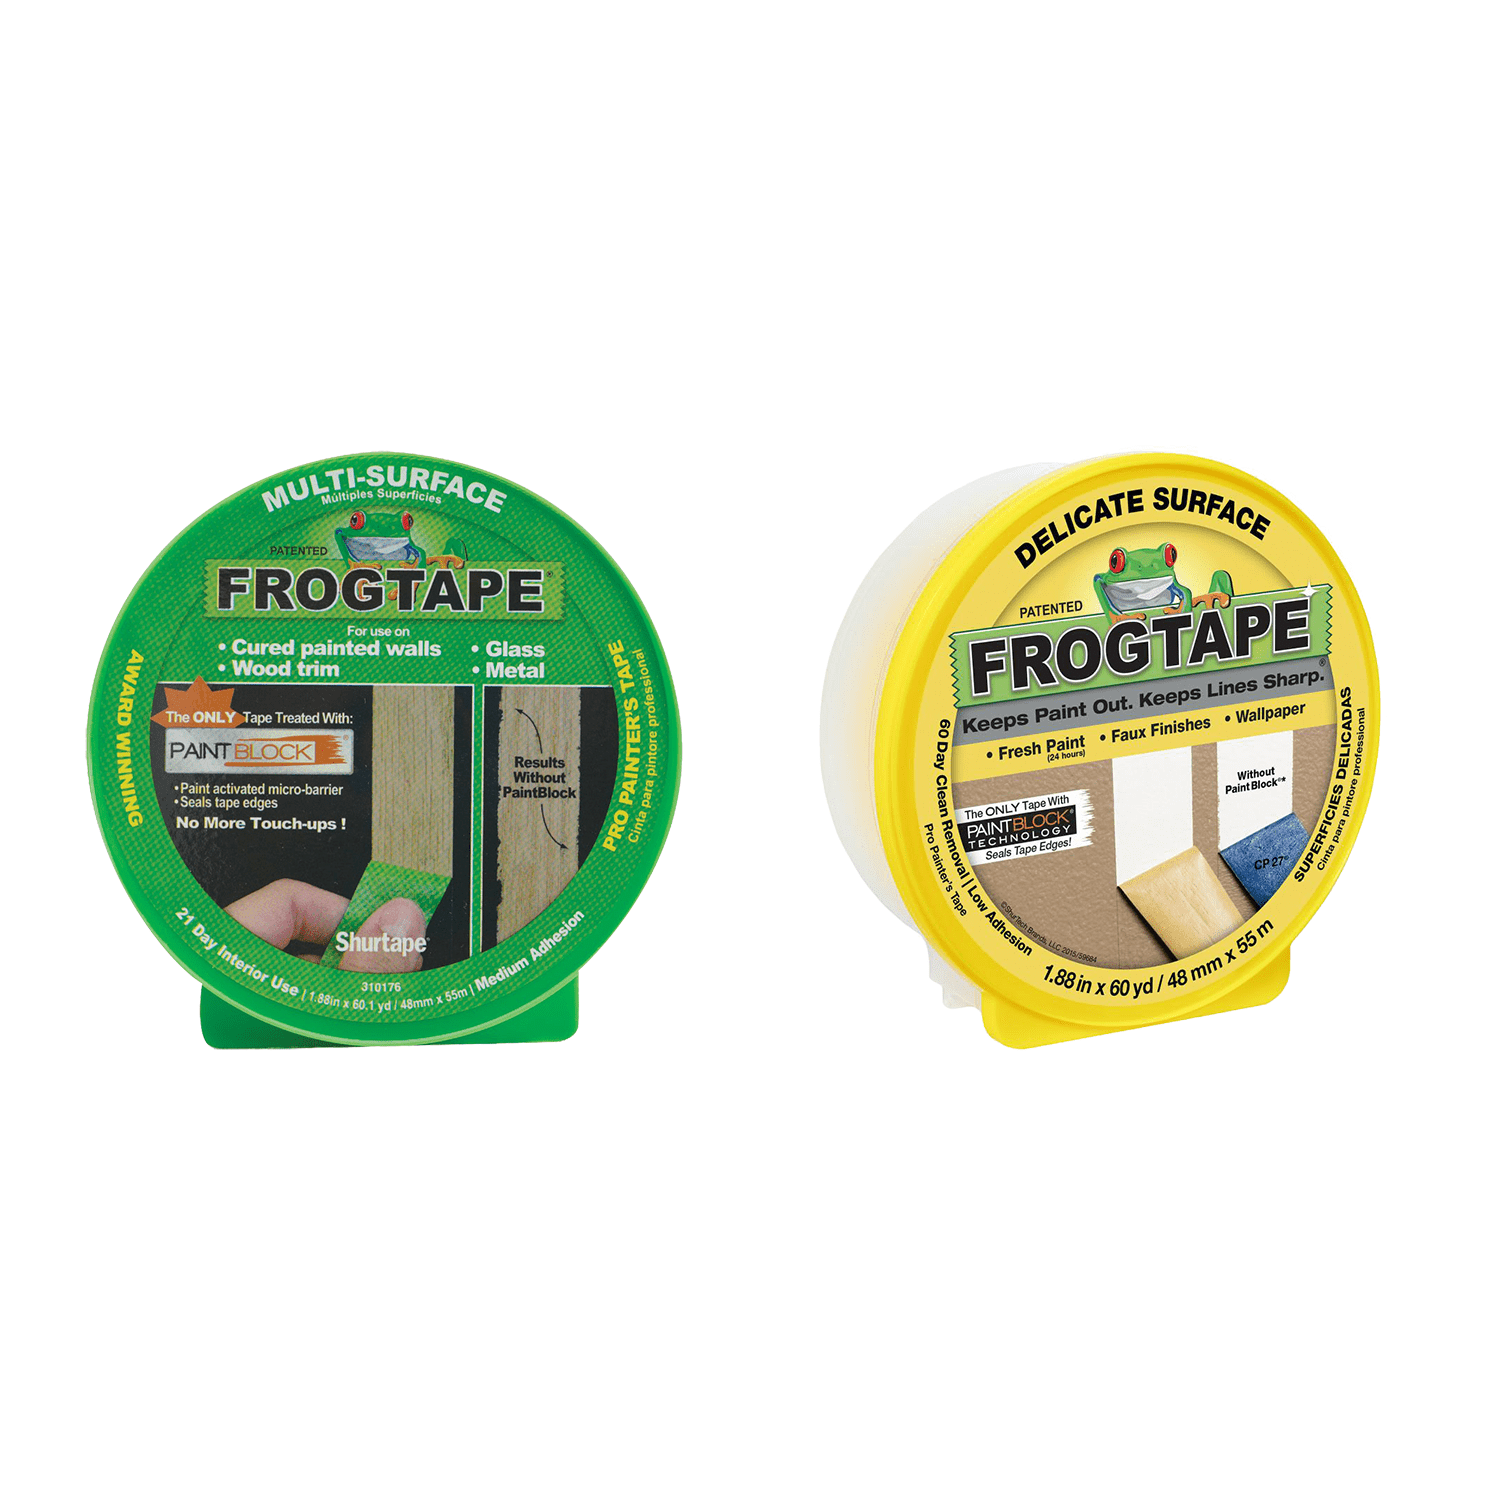 FrogTape Delicate Surface 1.88-in x 60 Yard(s) Painters Tape at